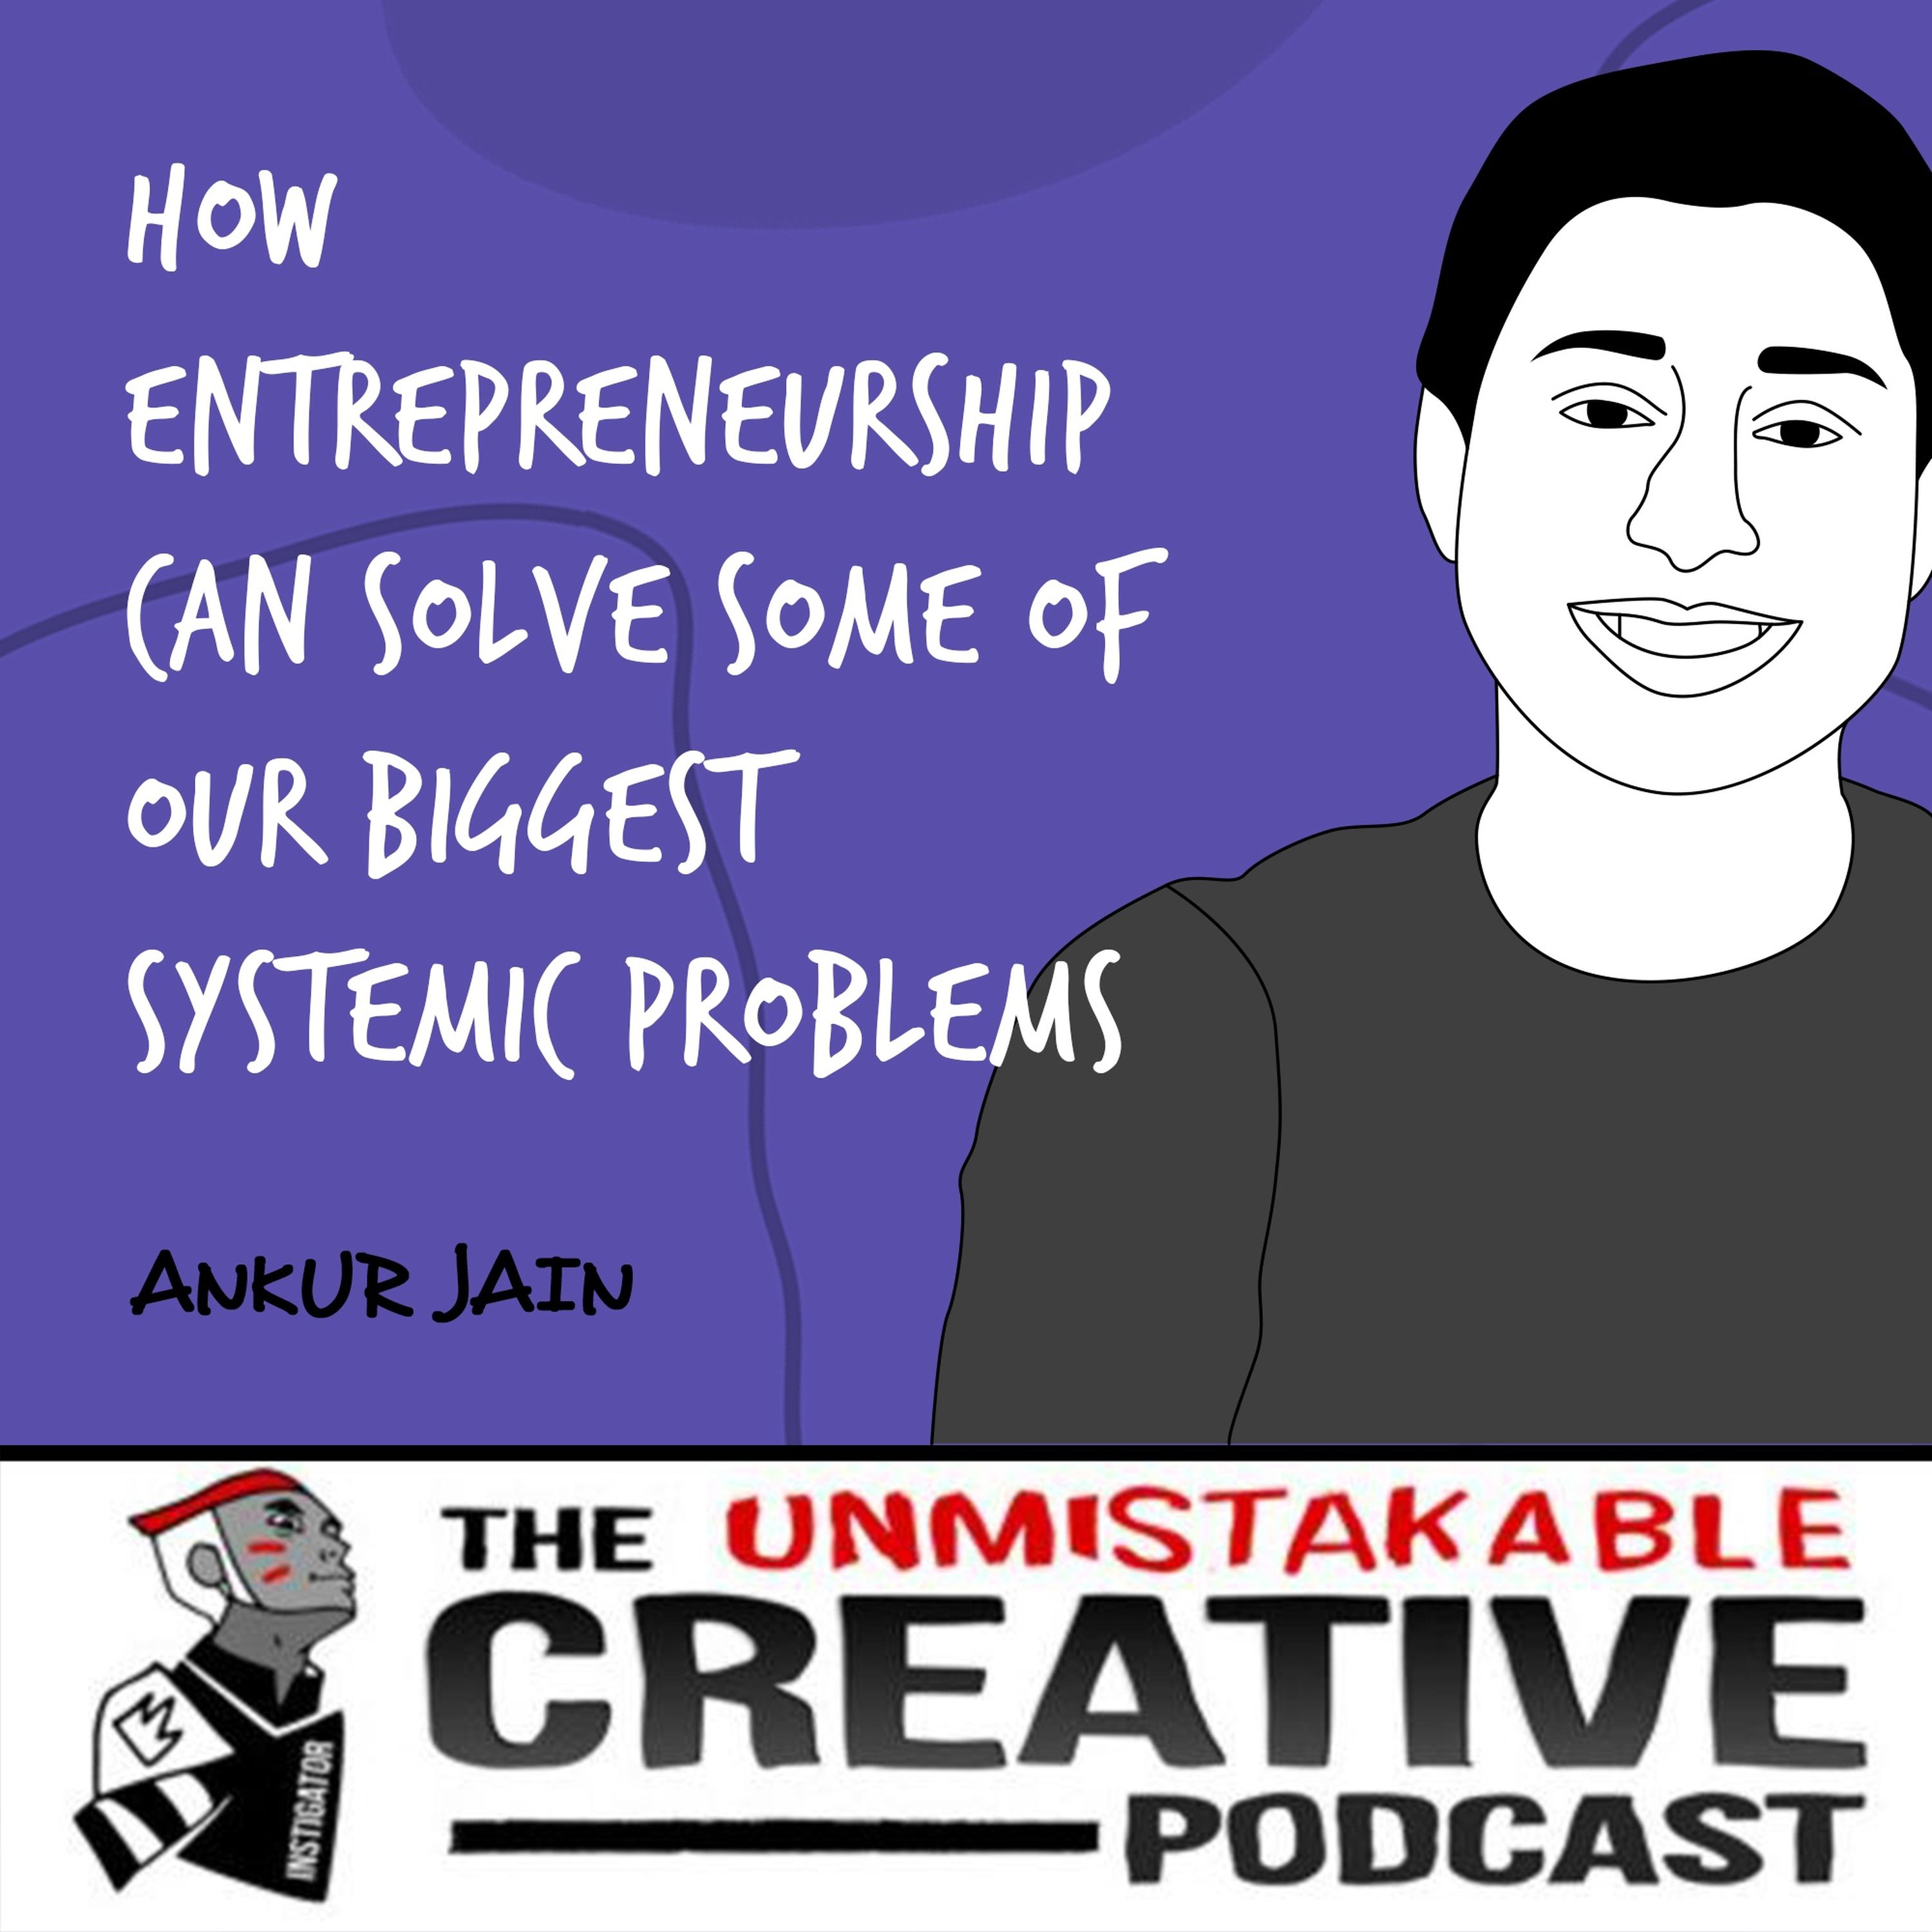 Best of 2021: Ankur Jain | How Entrepreneurship Can Solve Some Of Our Biggest Systemic Problems